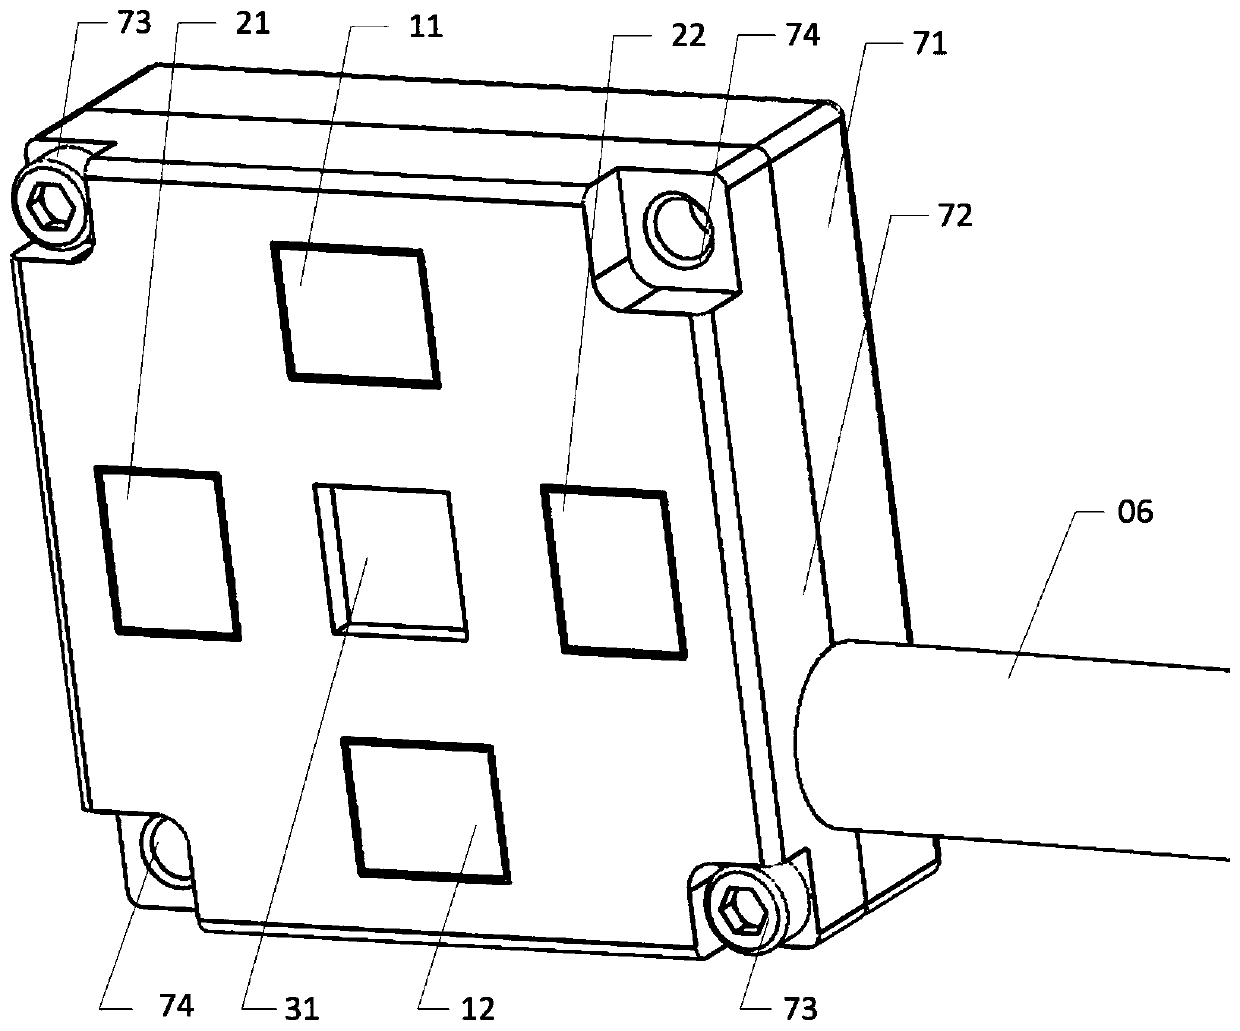 Multi-degree-of-freedom displacement measurement system based on two-dimensional grating